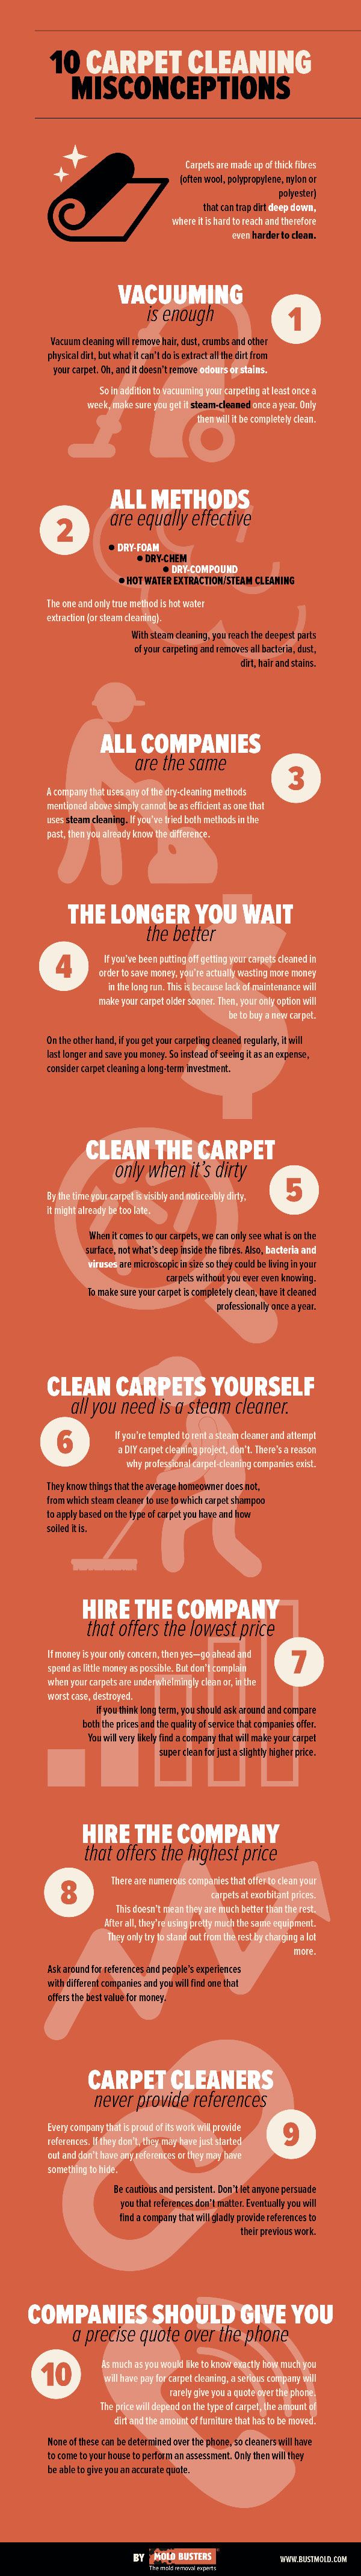 10 Carpet Cleaning Misconceptions